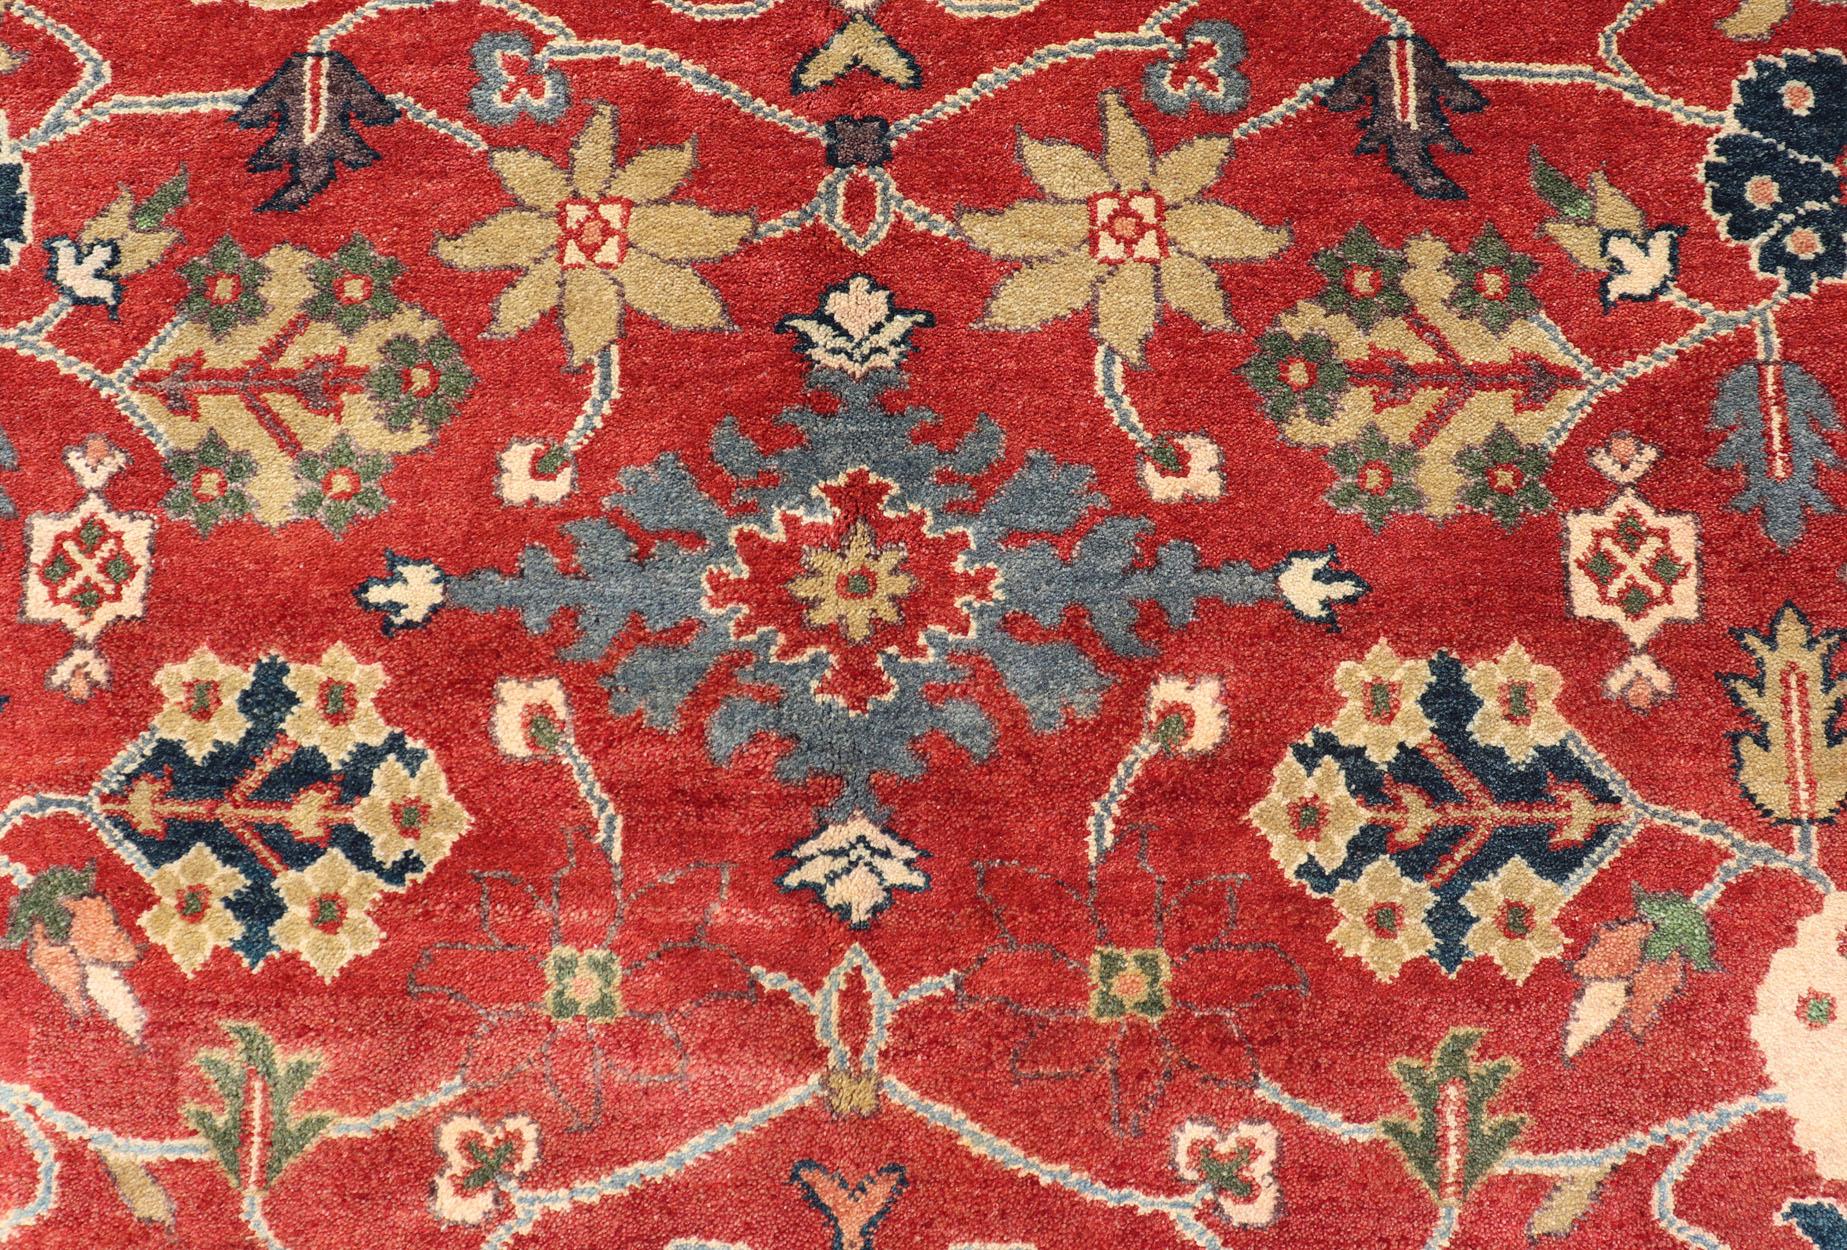 Reproduction Sultanabad-Mahal All-over Floral Hand-Knotted Carpet  3